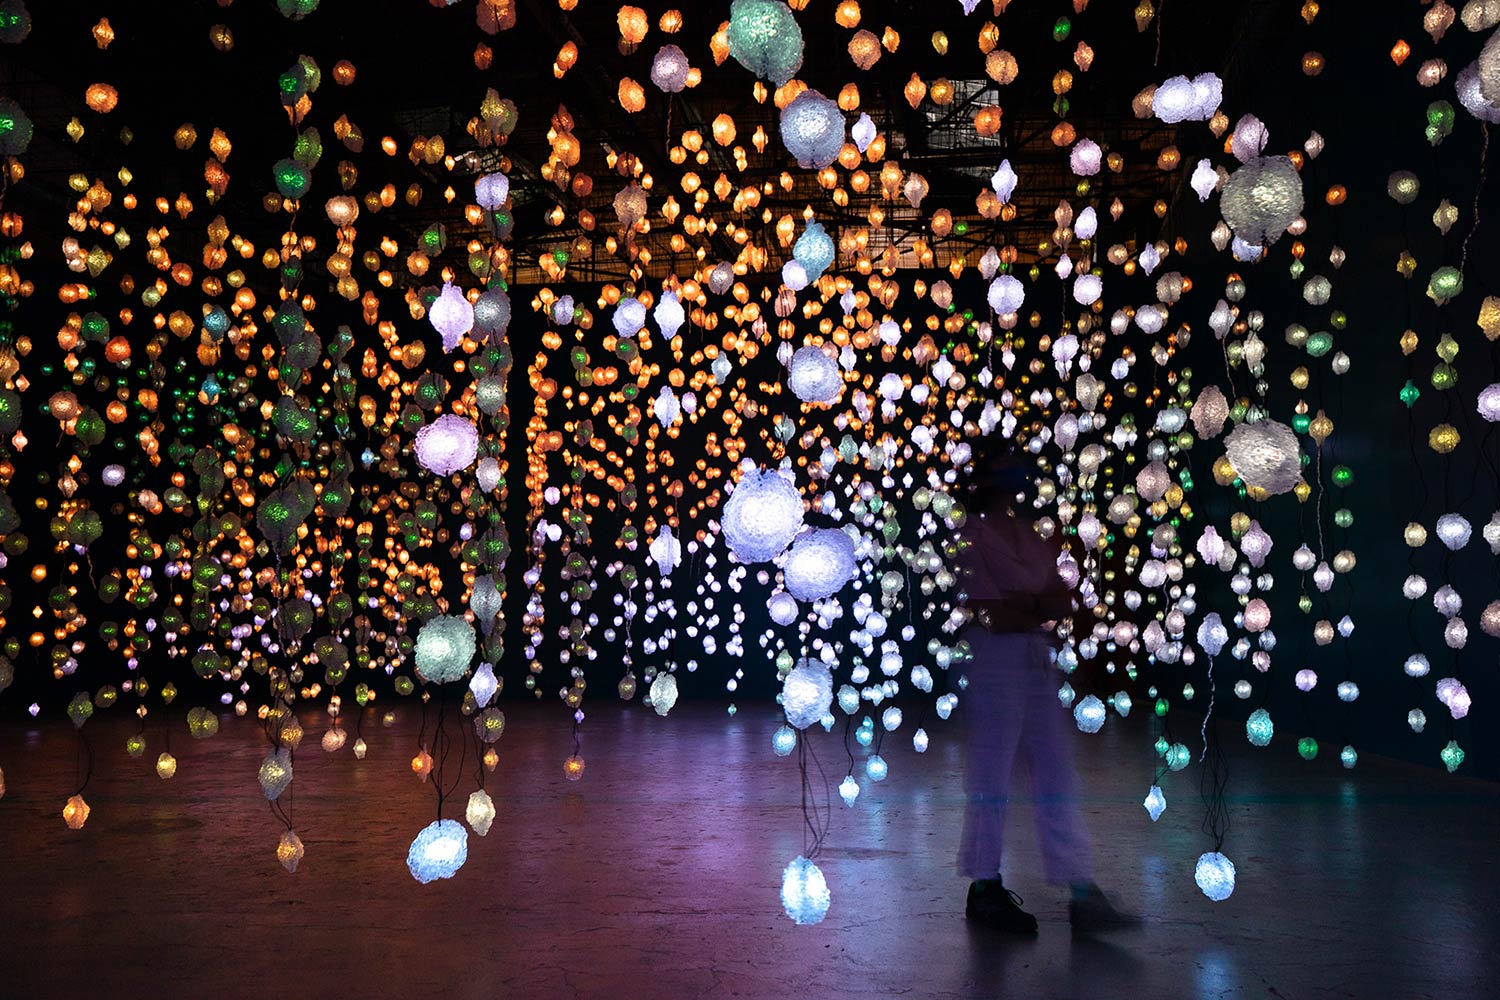 National Museum of Qatar to Debut Commission by World Renowned Artist Pipilotti Rist